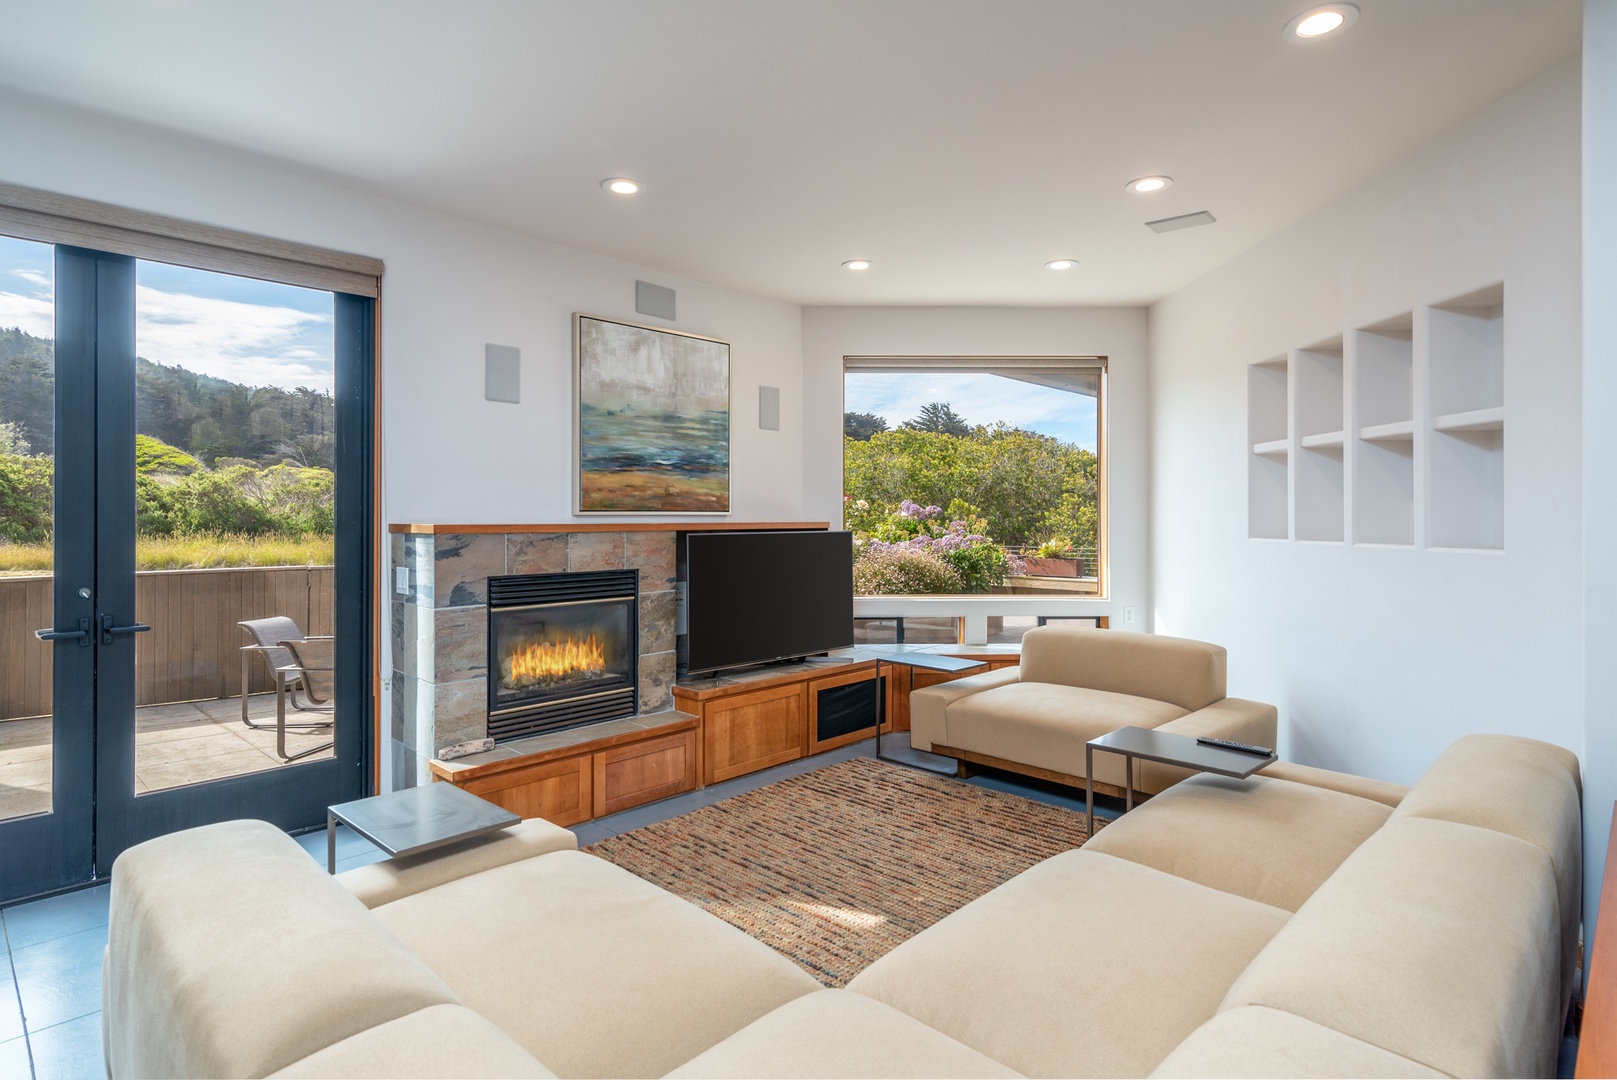 Living room features SmartTV and gas fireplace